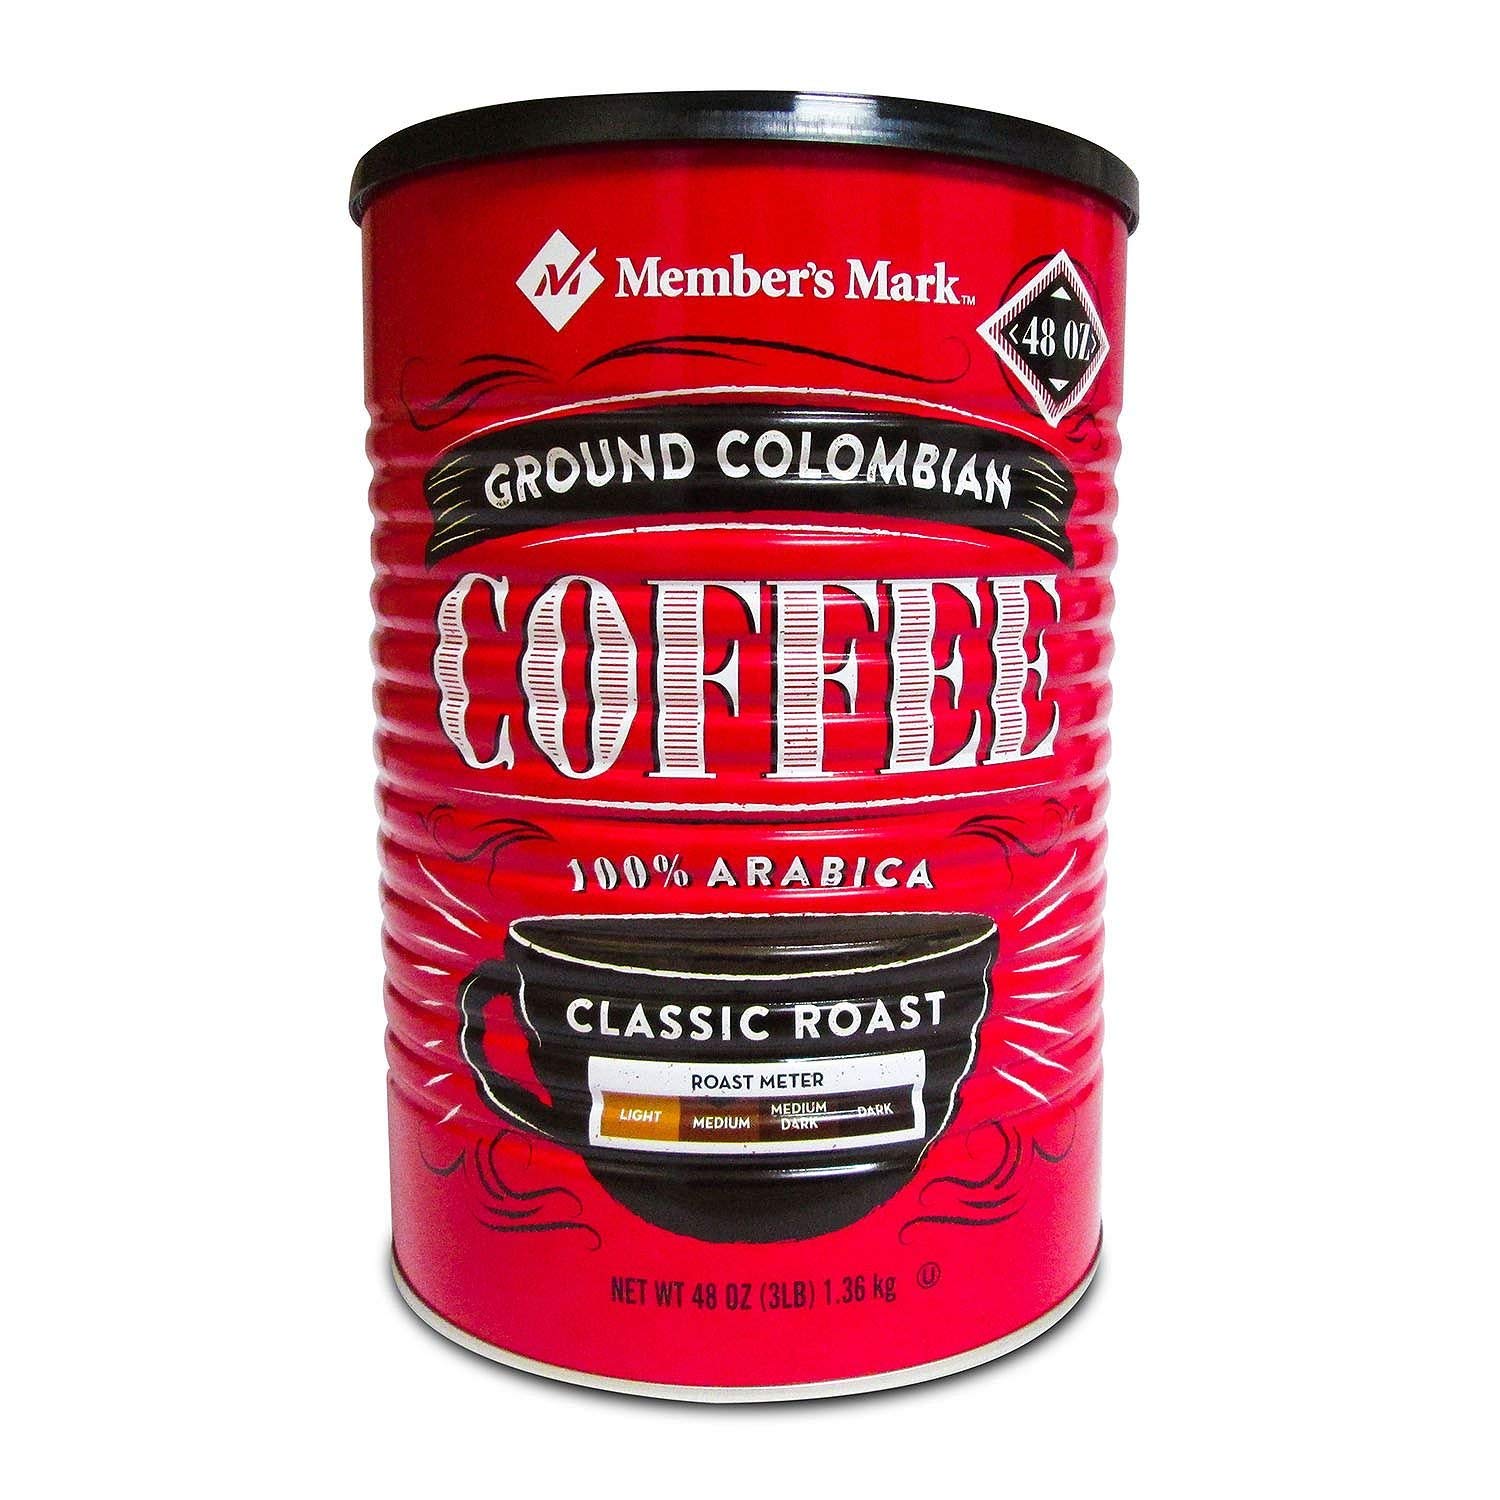 Member's Mark Ground Colombian Coffee, 3 Lb - PACK OF 5